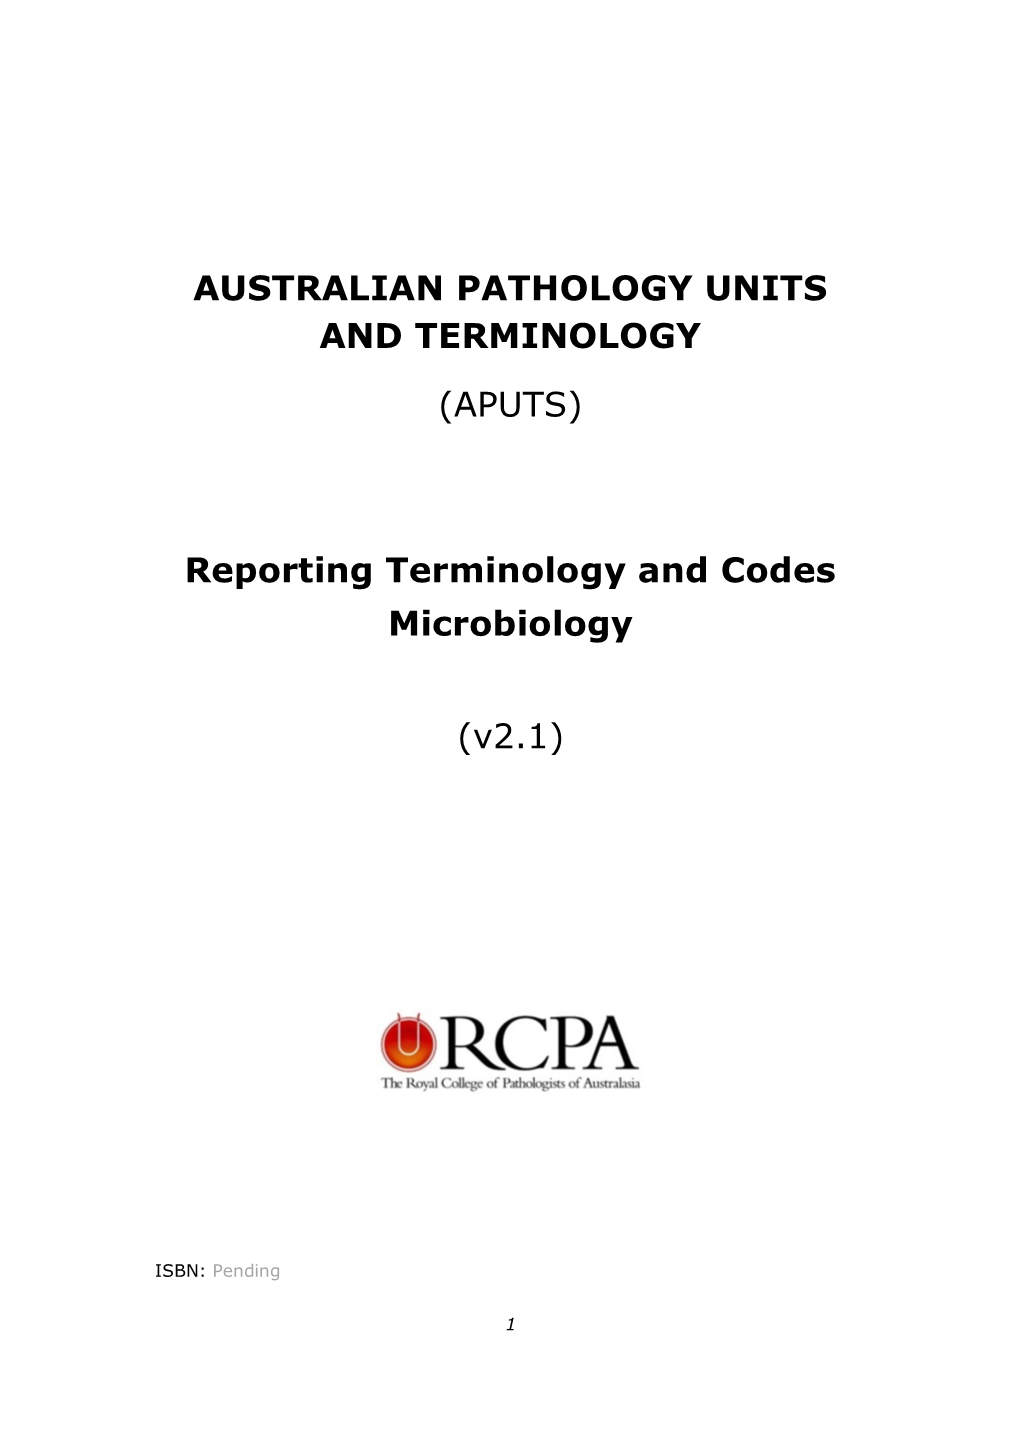 APUTS) Reporting Terminology and Codes Microbiology (V2.1